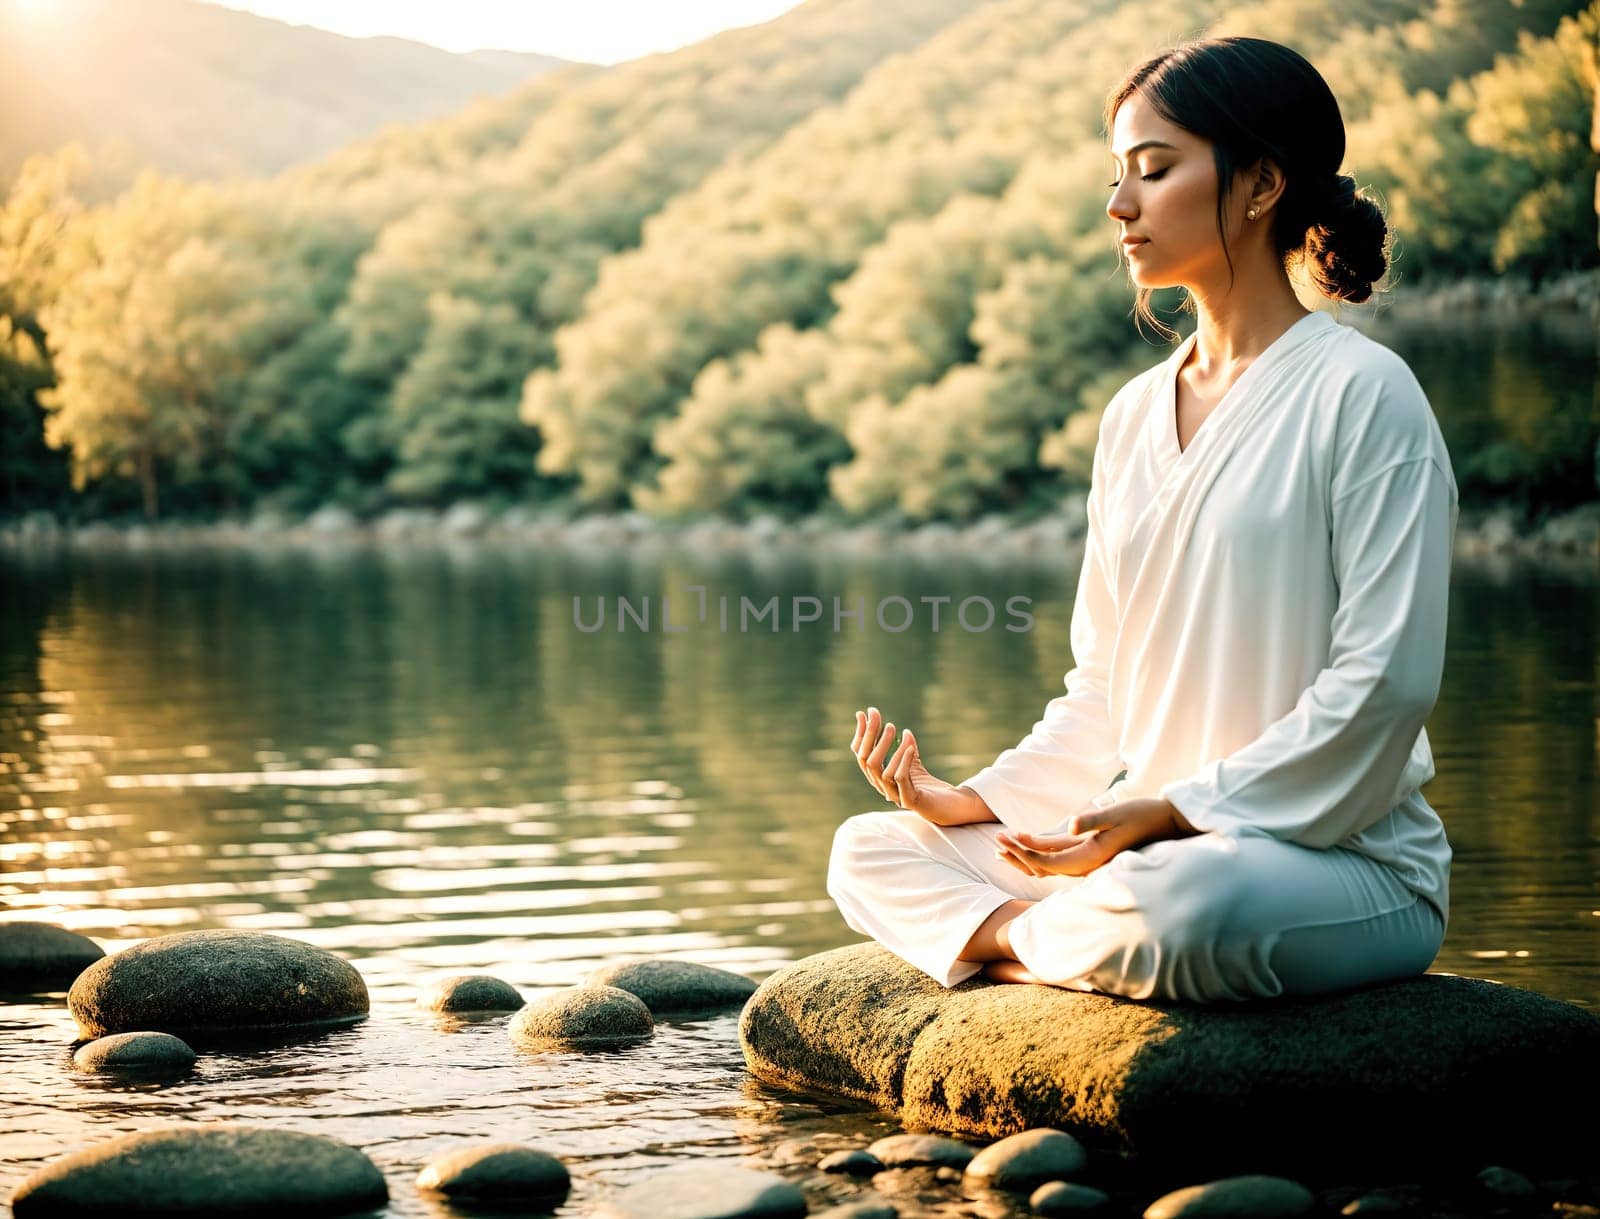 The image shows a woman sitting on a rock in the middle of a river, meditating with her eyes closed and her hands in prayer position.